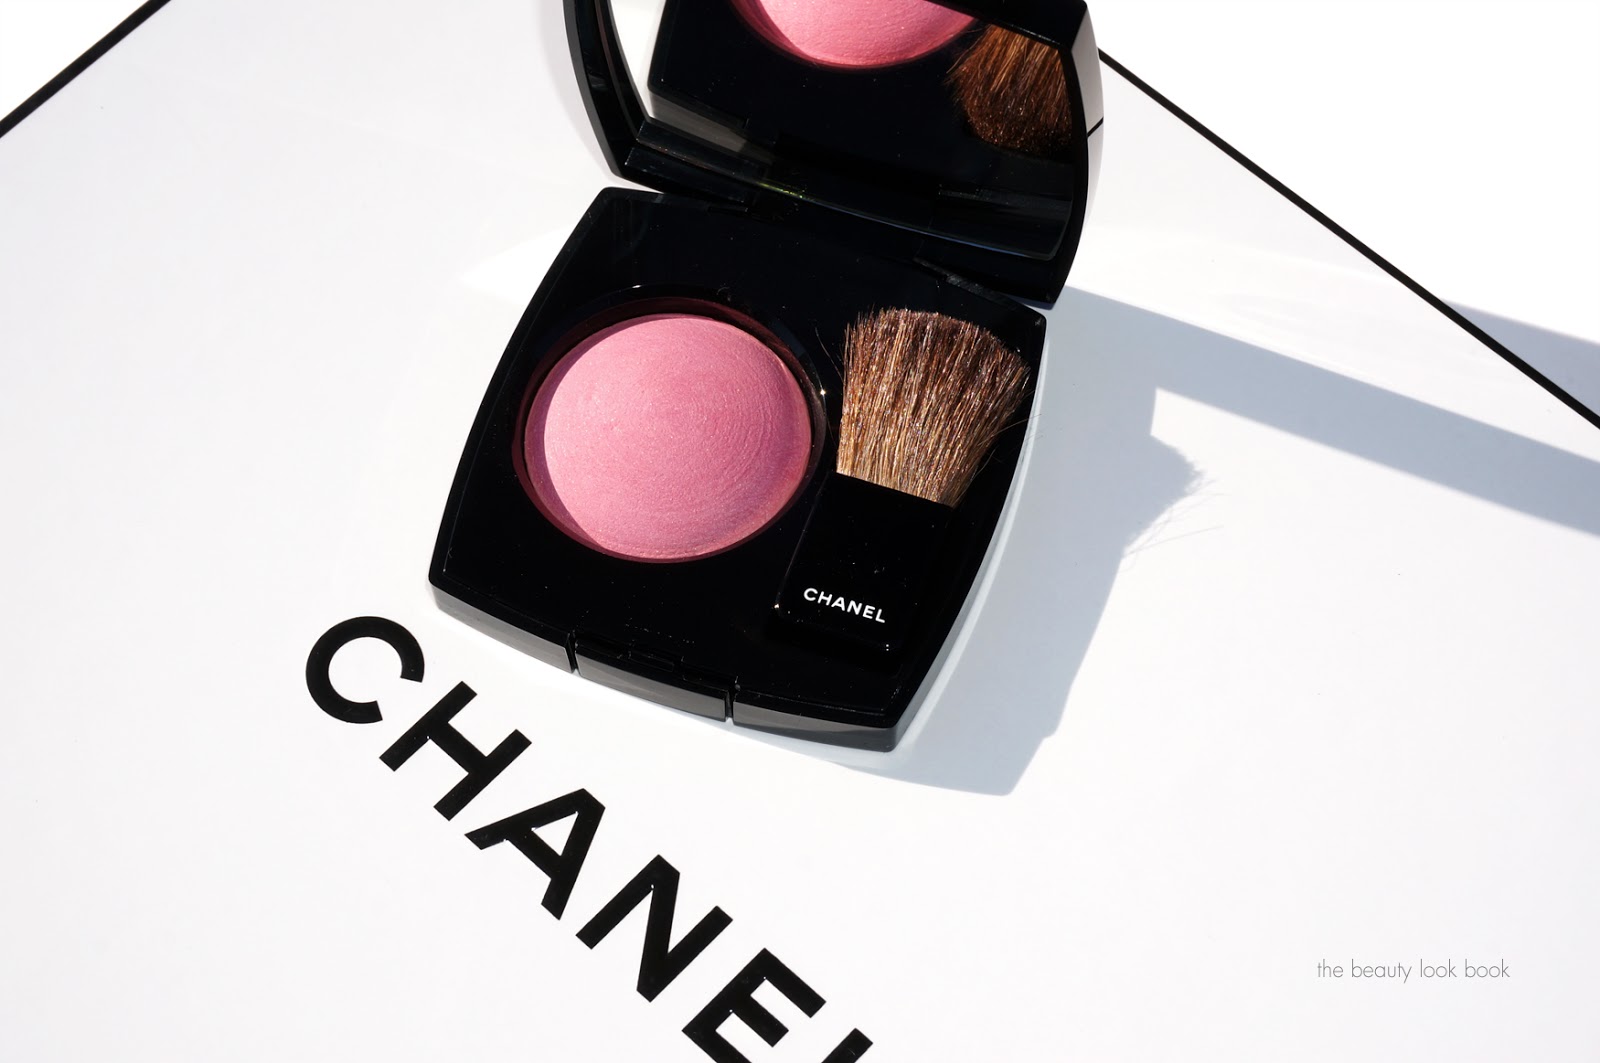 Chanel Joues Contraste Powder Blush in Crescendo #250 - The Beauty Look Book